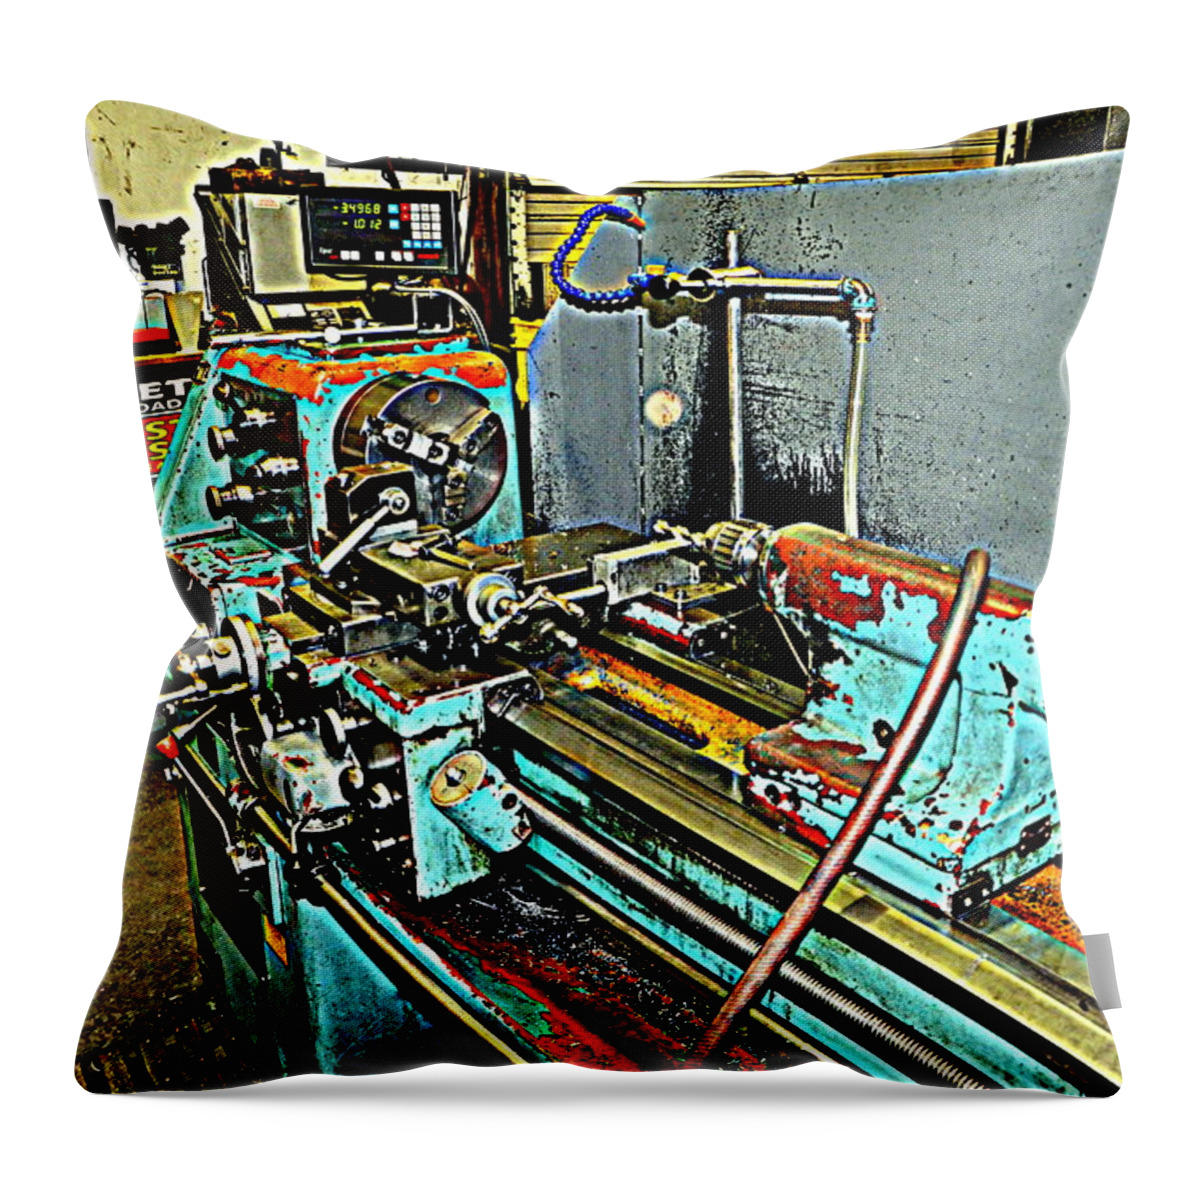 Machinist Throw Pillow featuring the photograph Machinist Equipment Series 1 by Antonia Citrino